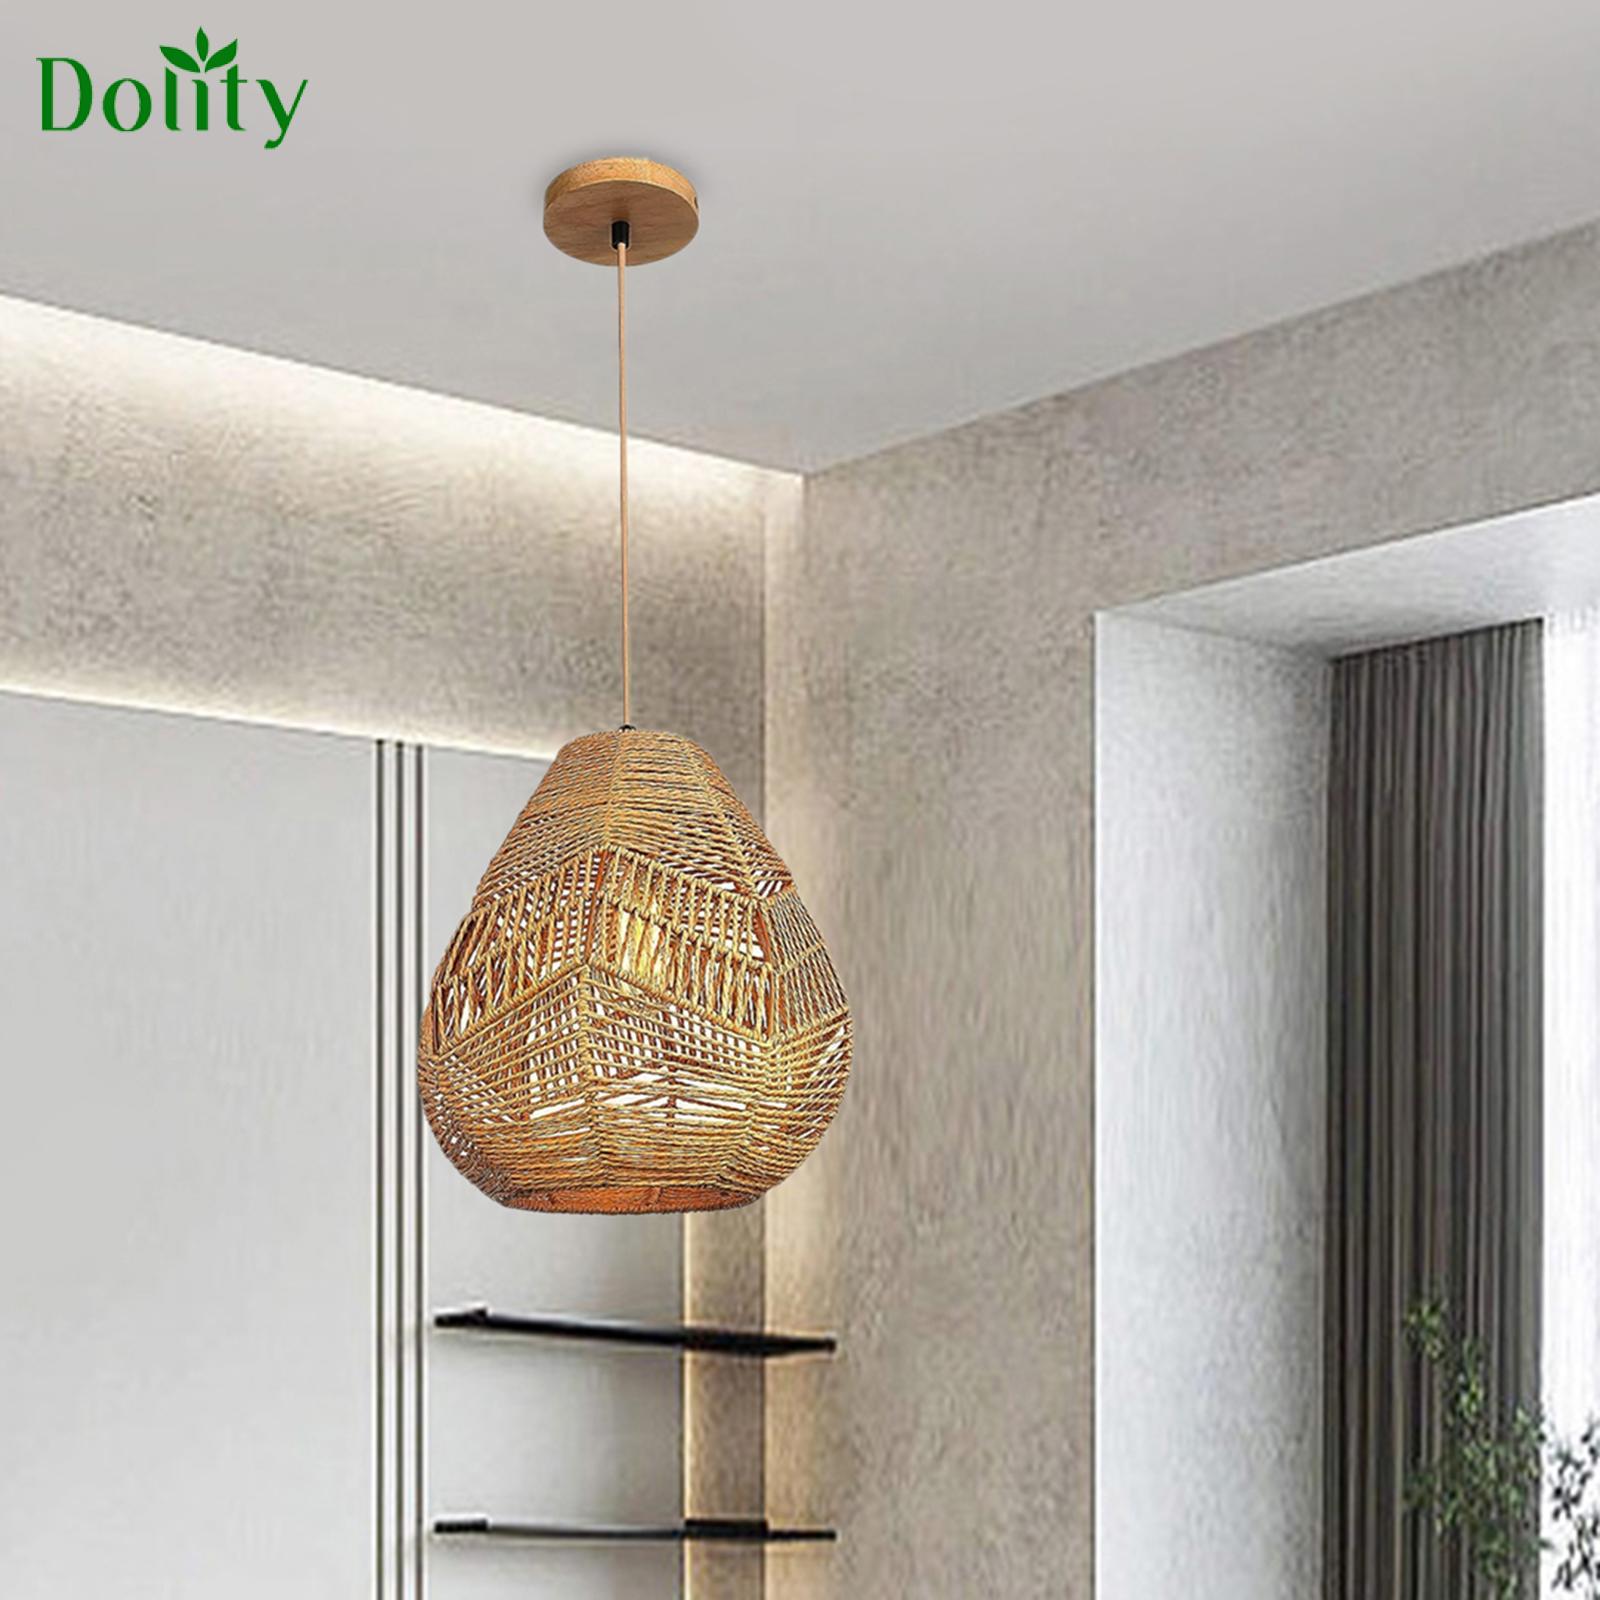 Dolity Pendant Sconce Shade Rope Lampshade, Wicker Pendant Light Shade